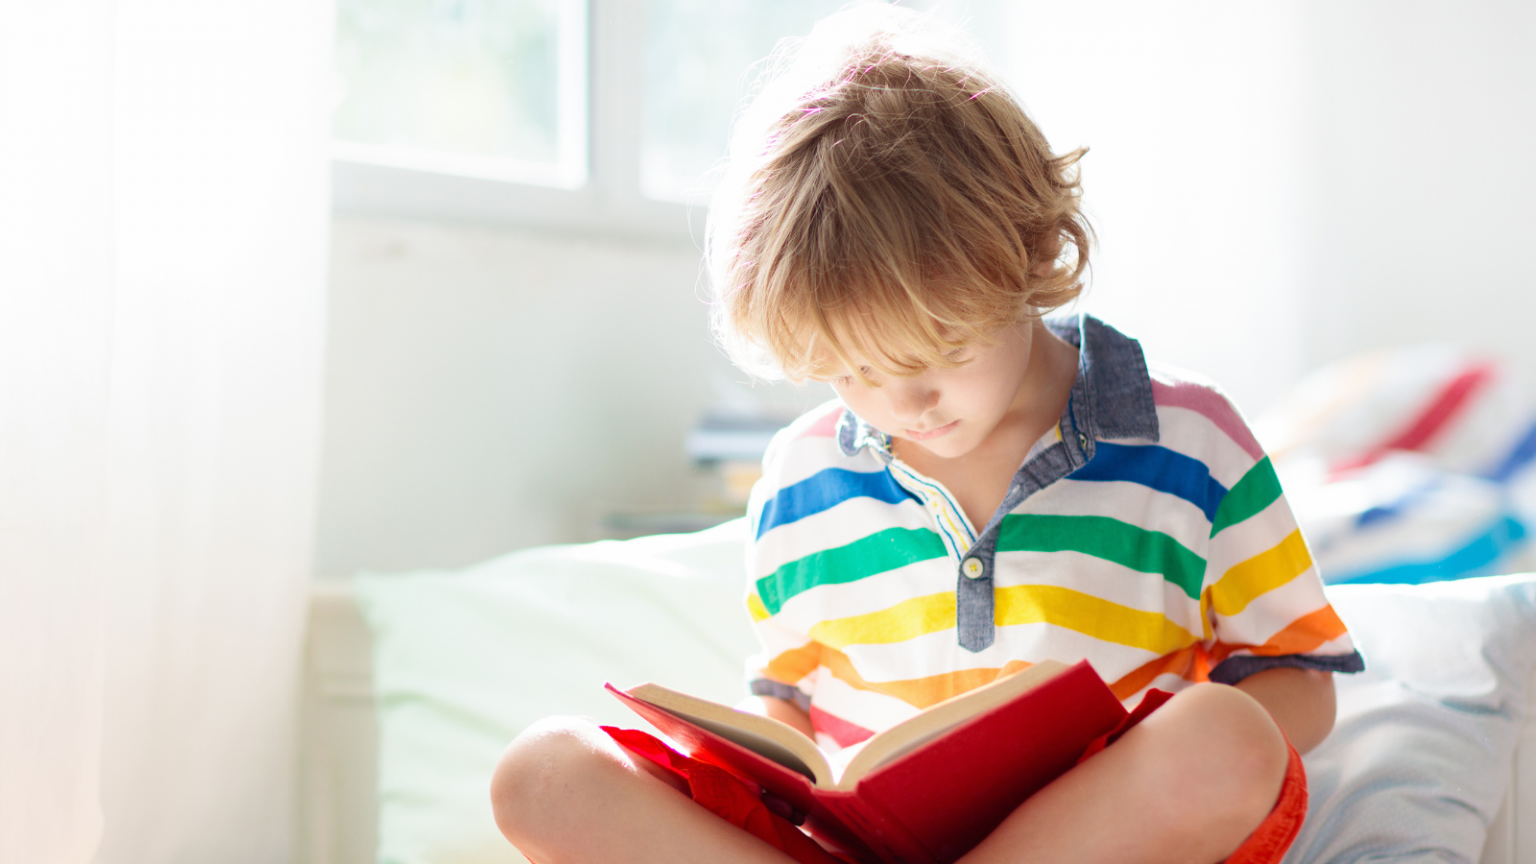 Book ideas for kids: Awesome books for 6-8 year olds